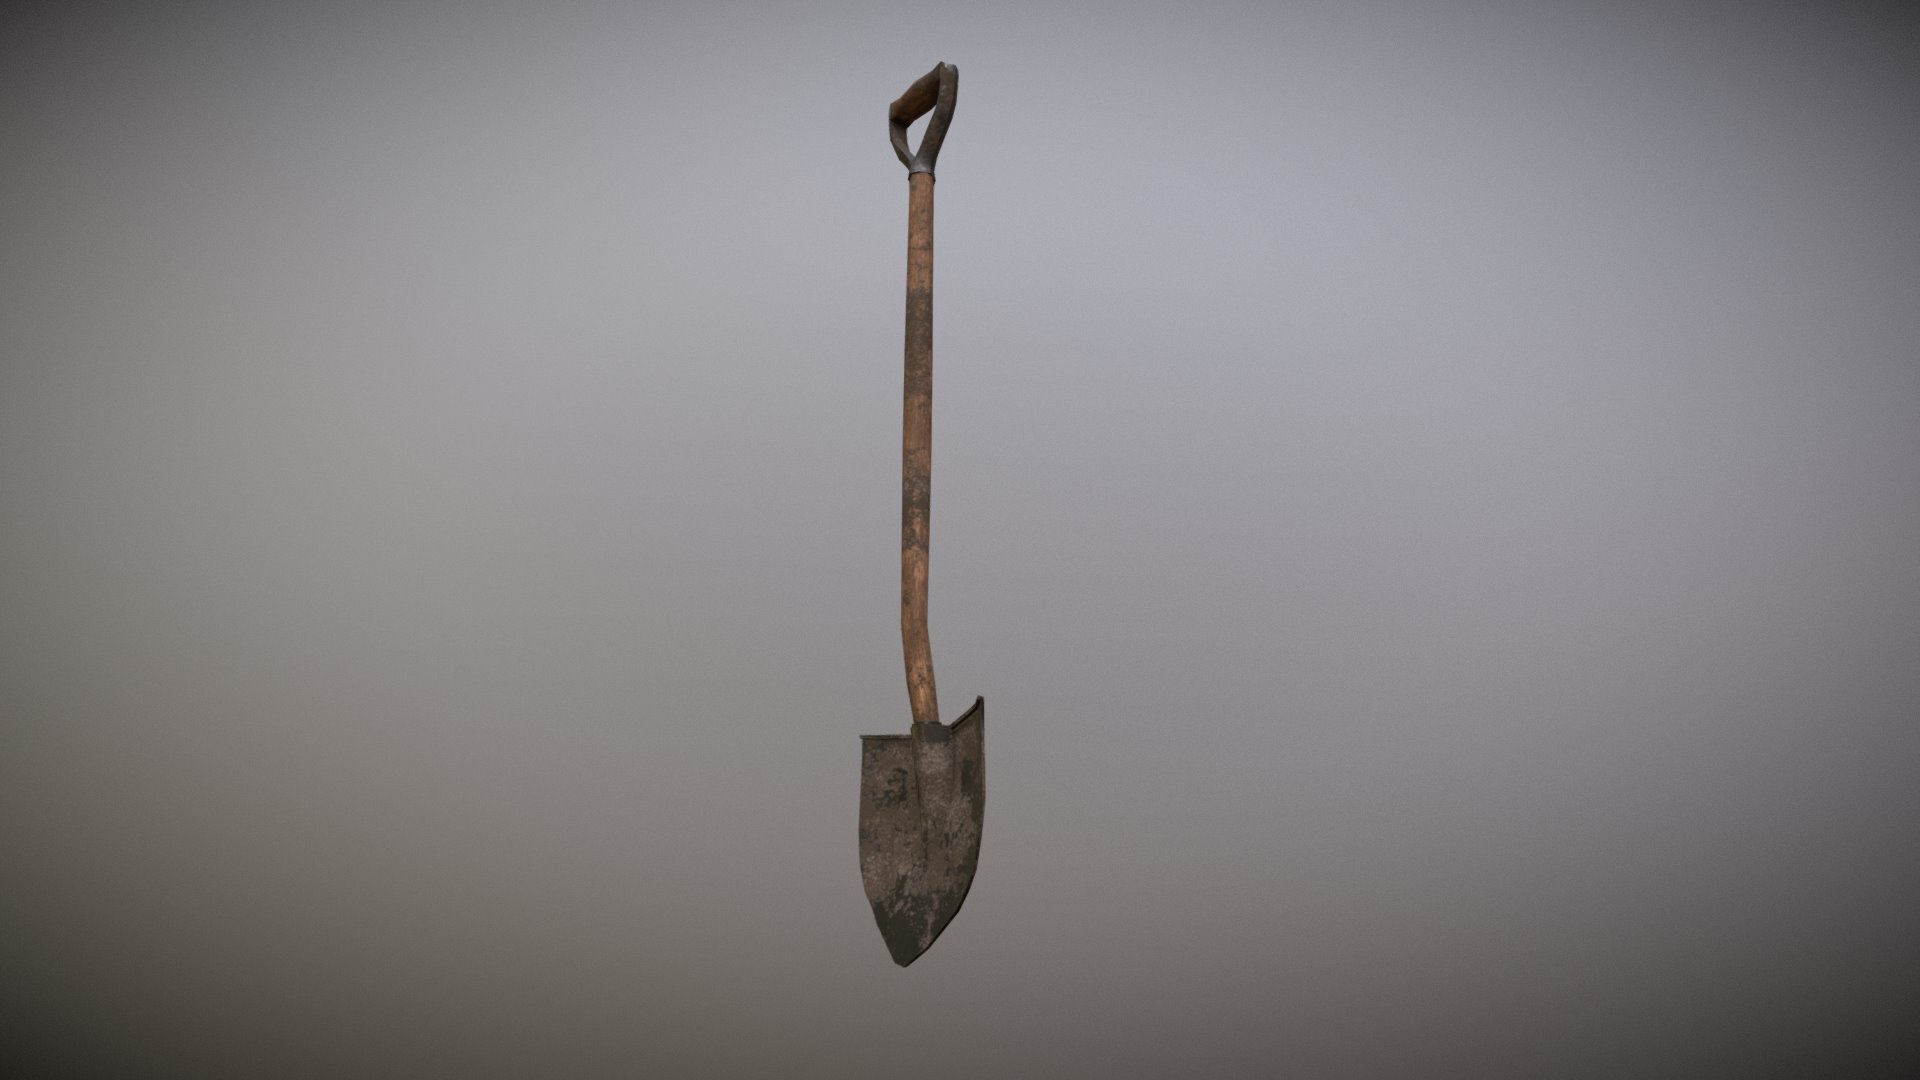 3D model Low Poly Dirty Shovel - This is a 3D model of the Low Poly Dirty Shovel. The 3D model is about a wooden pole with a handle.